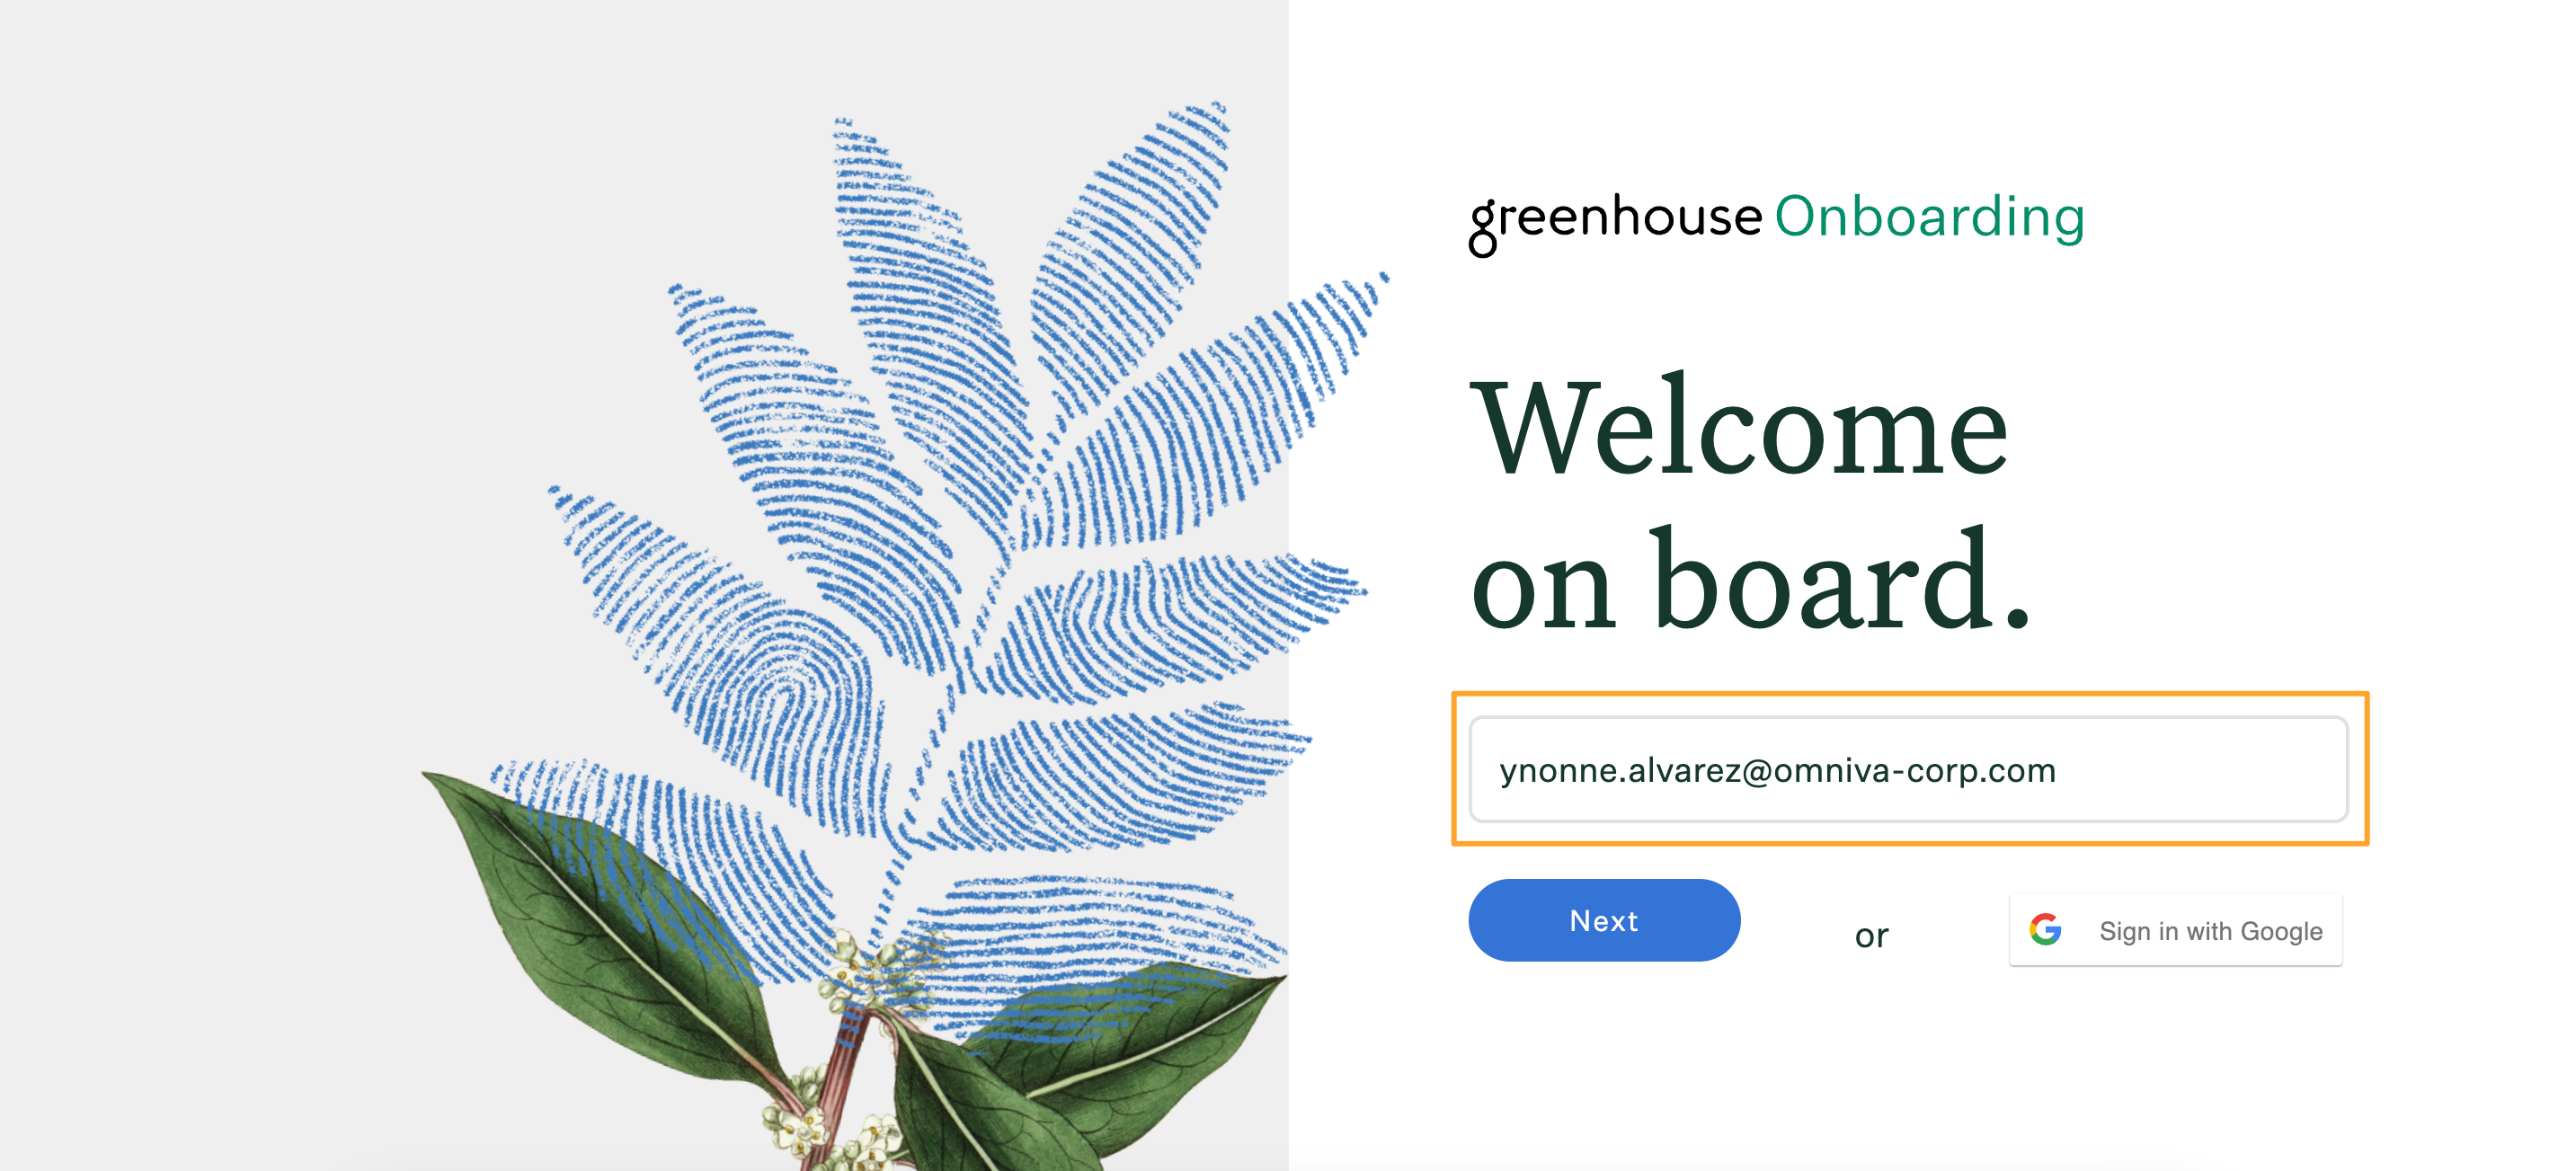 Greenhouse Onboarding login page with email field filled out and highlighted